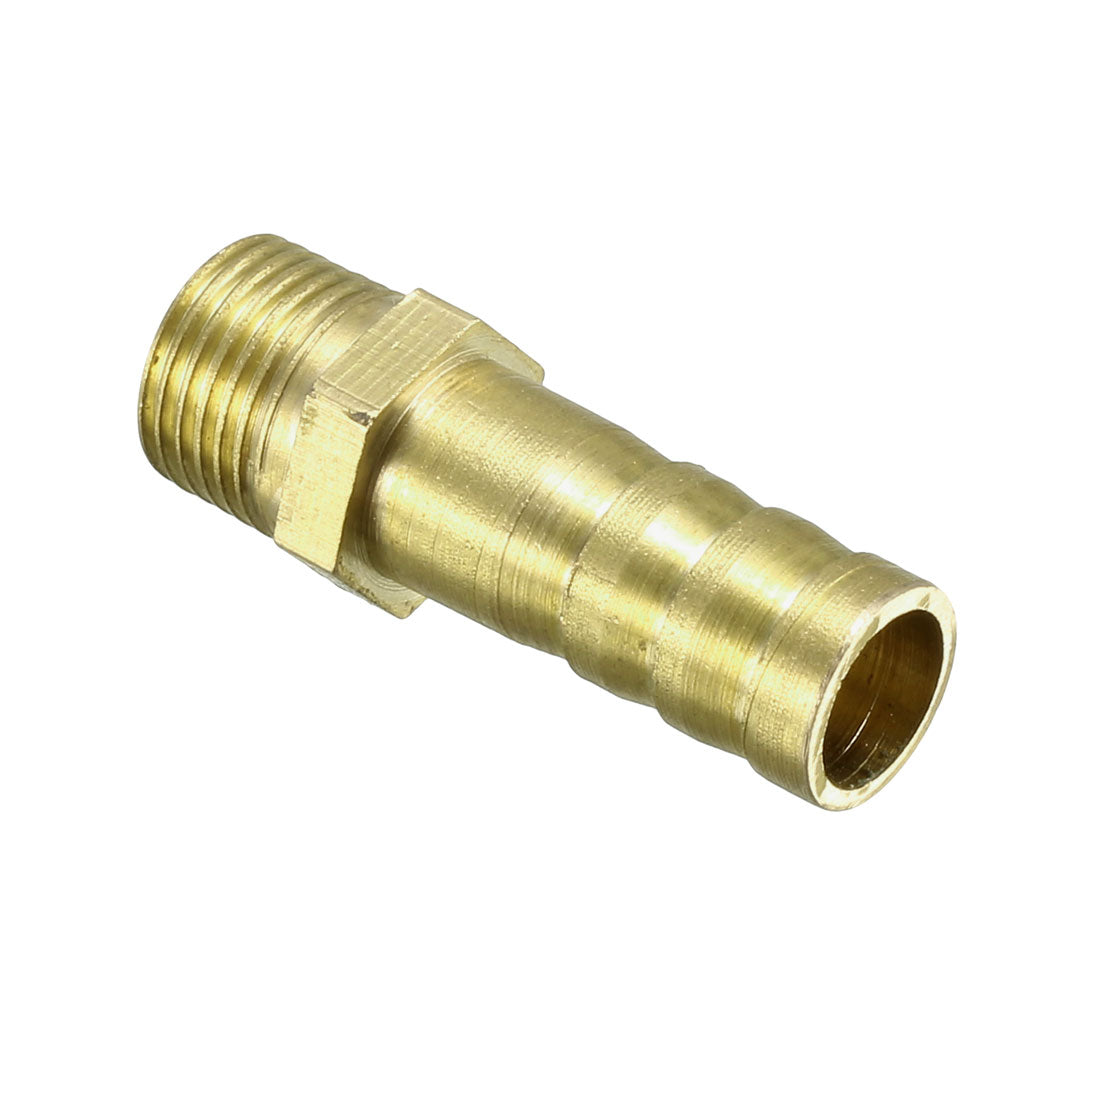 uxcell Uxcell Brass Barb Hose Fitting Connector Adapter 8mm Barbed x 1/8 PT Male Pipe 5pcs